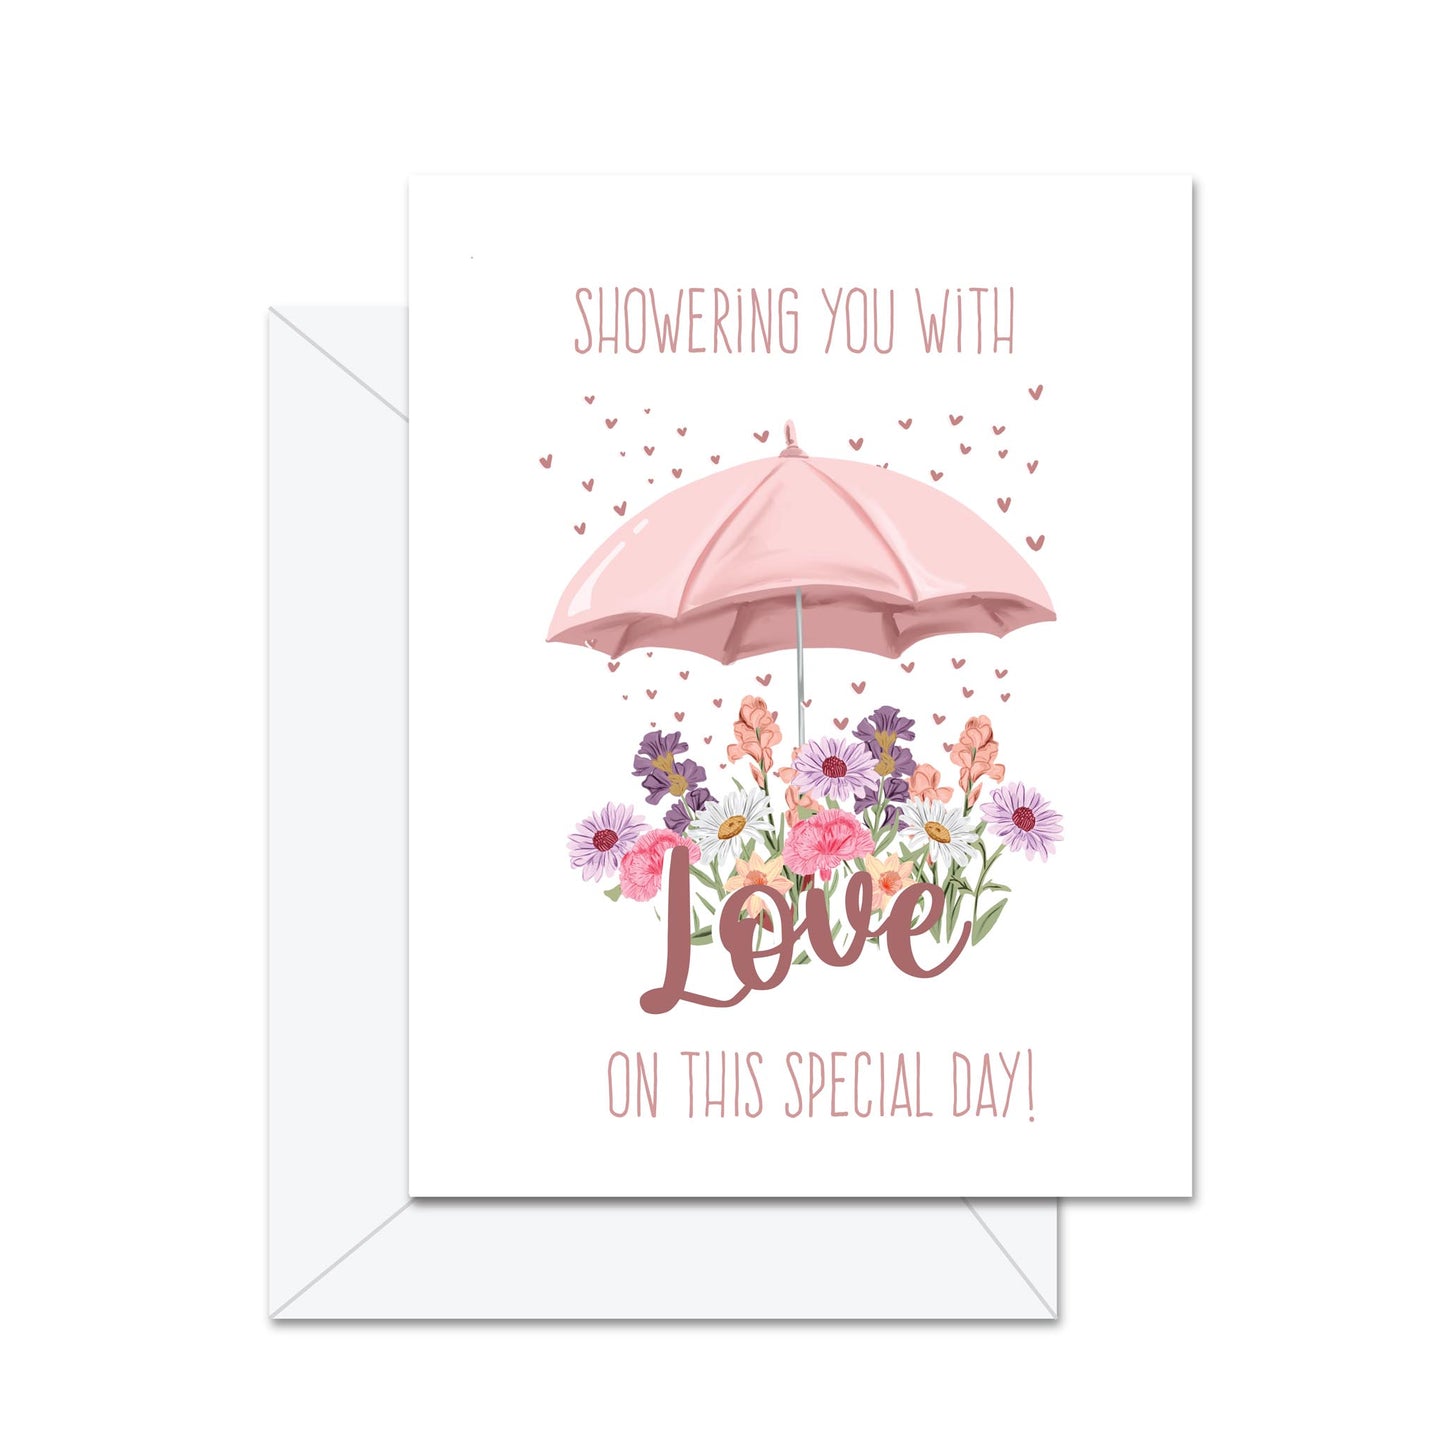 Showering You With Love On This Special Day!- Greeting Card